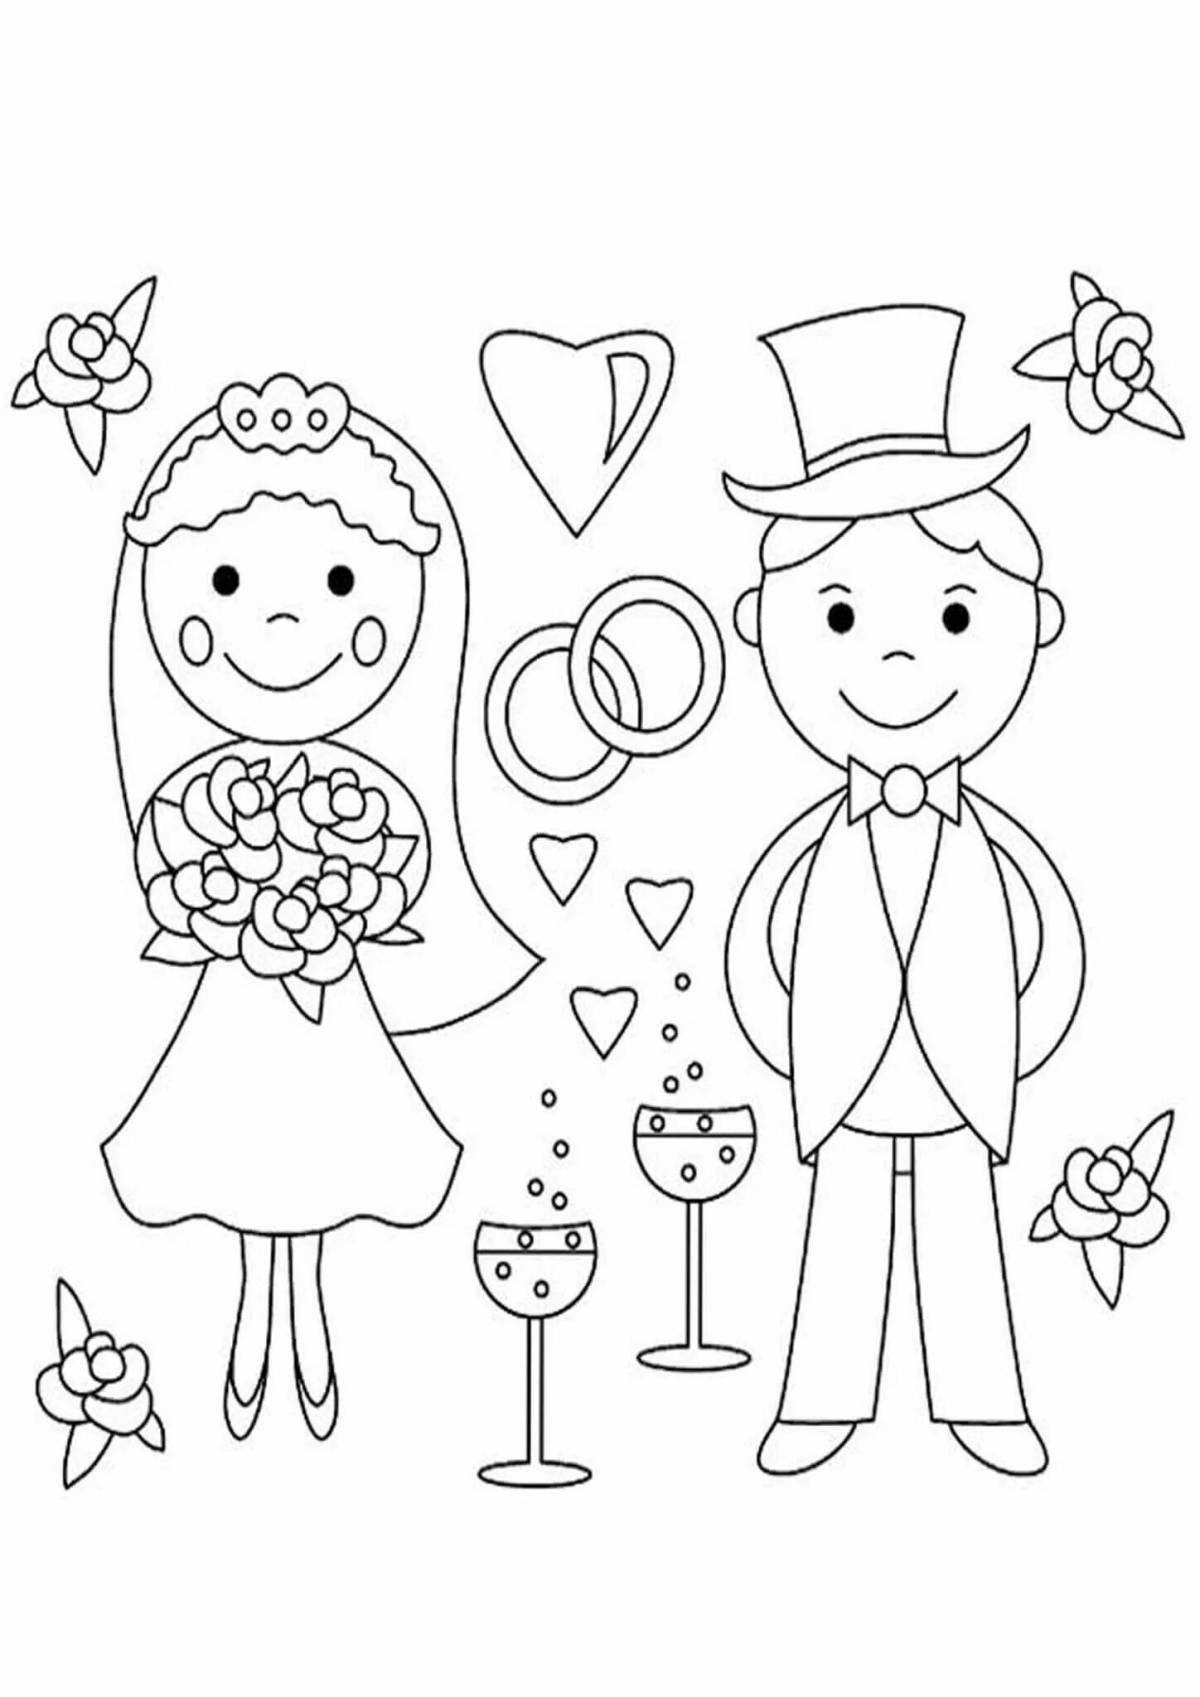 Great wedding coloring book for kids